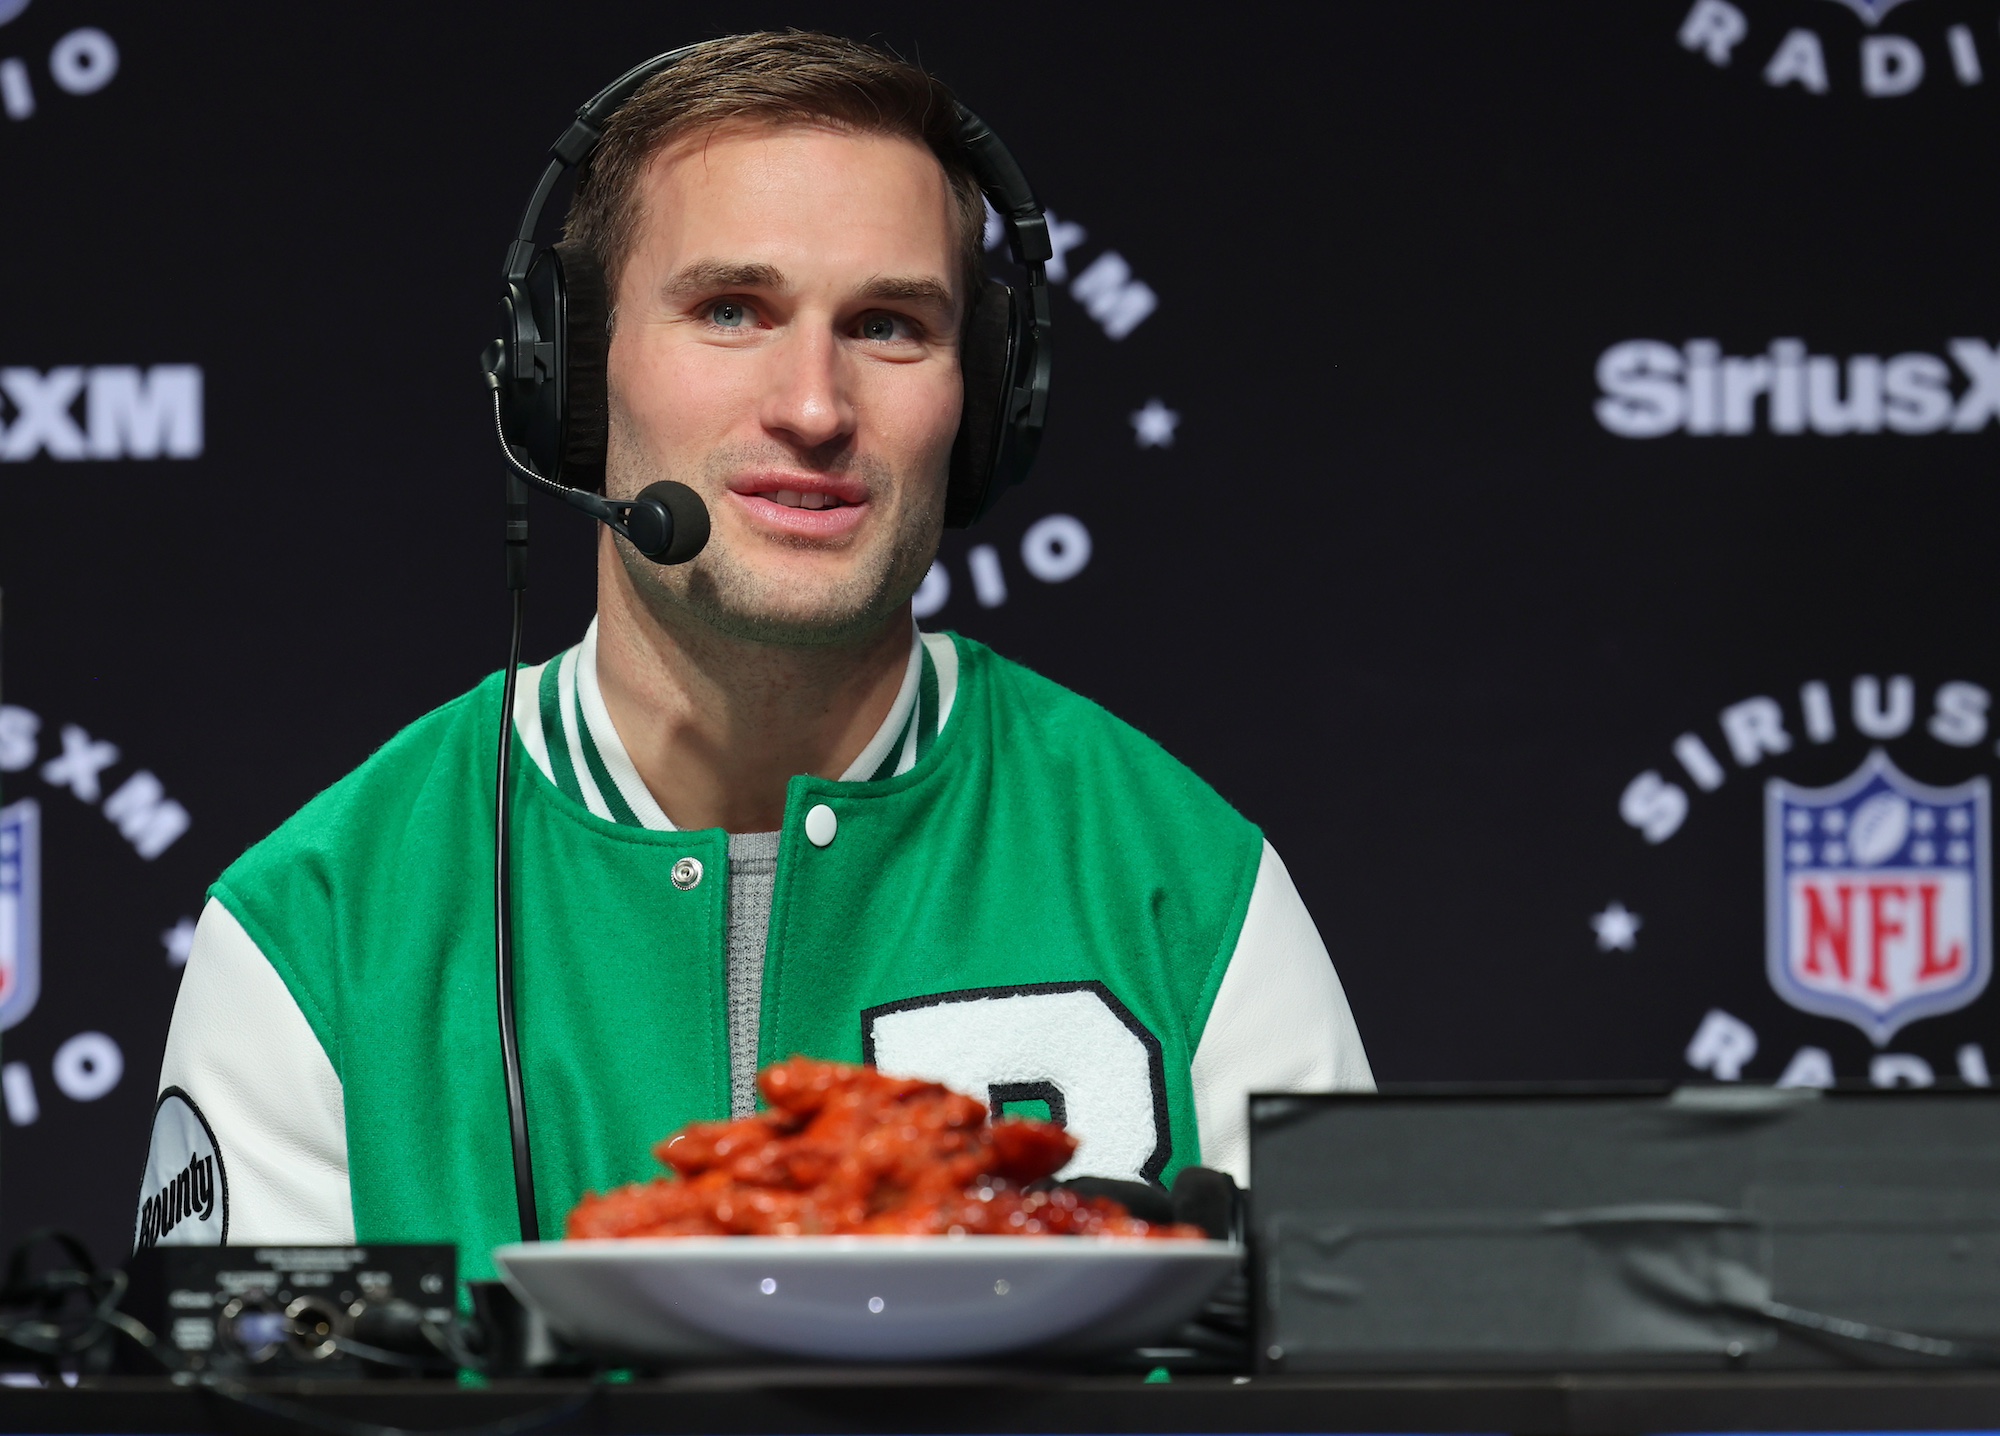 Kirk Cousins speaks on SiriusXM at Super Bowl LVIII on February 09, 2024 in Las Vegas, Nevada. (Photo by Cindy Ord/Getty Images for SiriusXM)